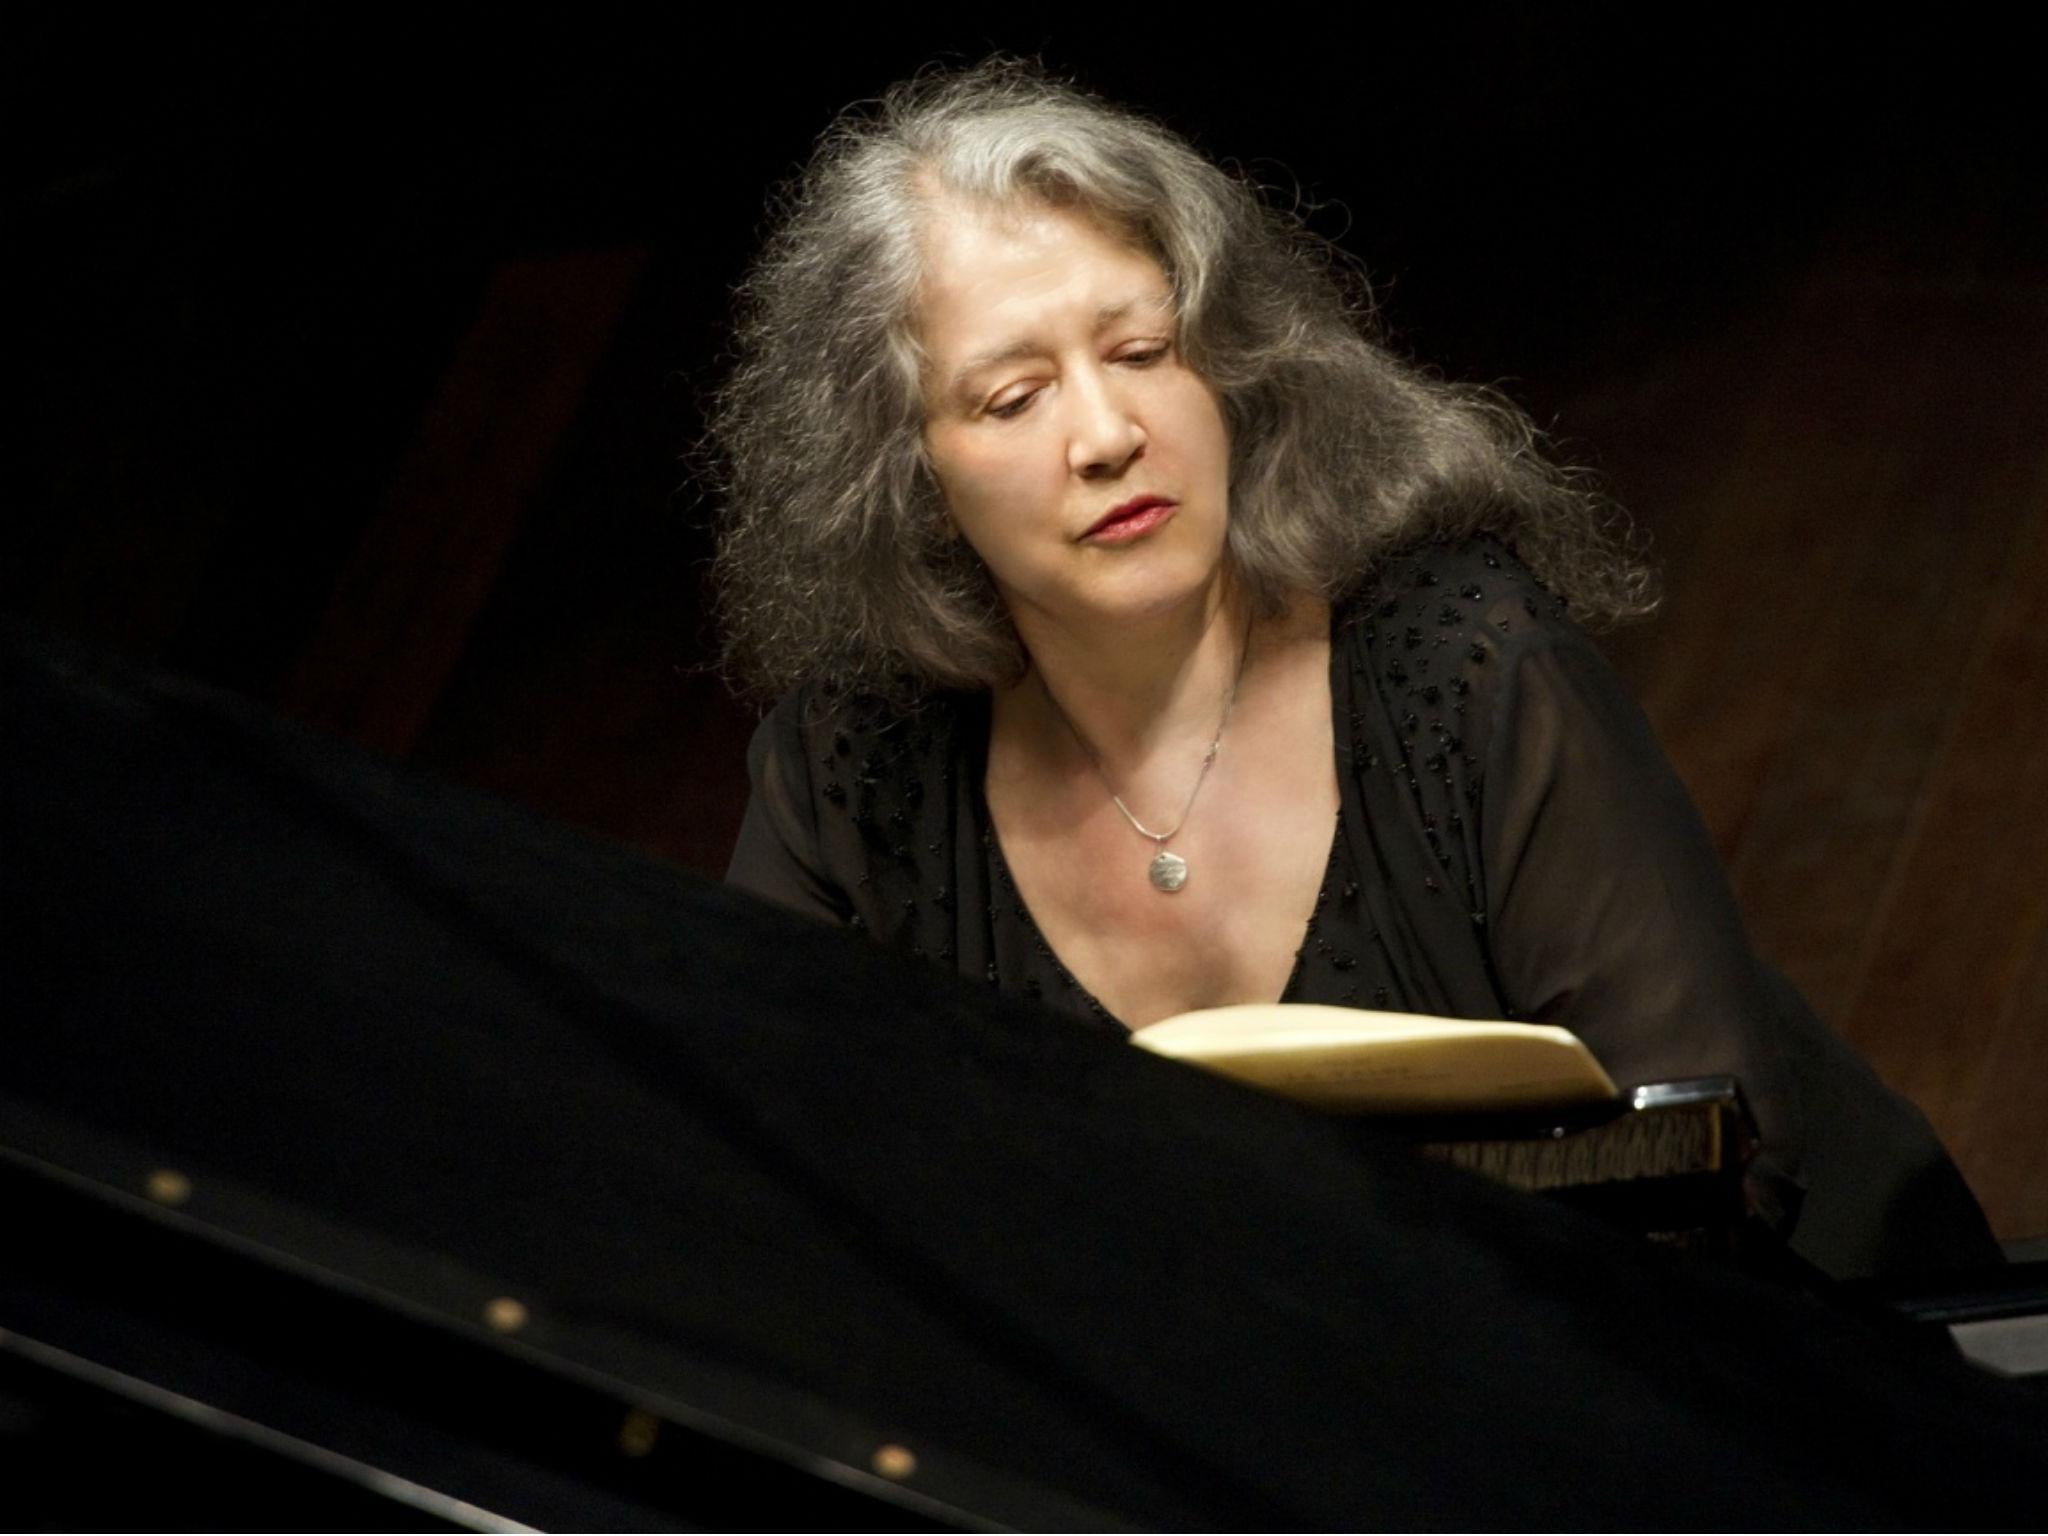 Martha Argerich often collaborates with former husbands, partners, and friends